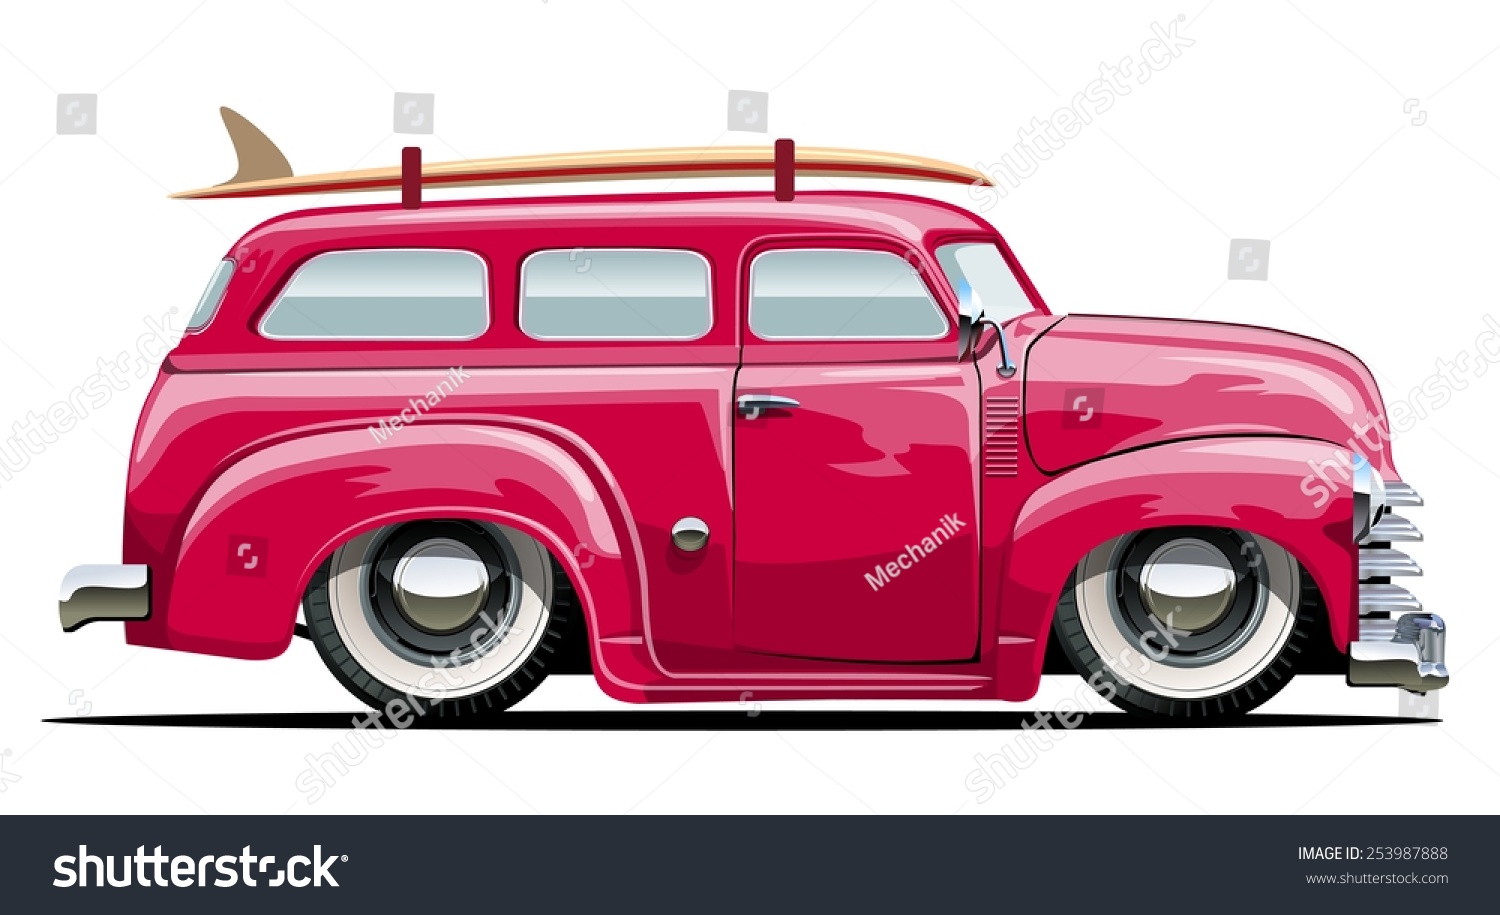 Cartoon Retro Van. Available Eps-10 Vector Format Separated By Groups